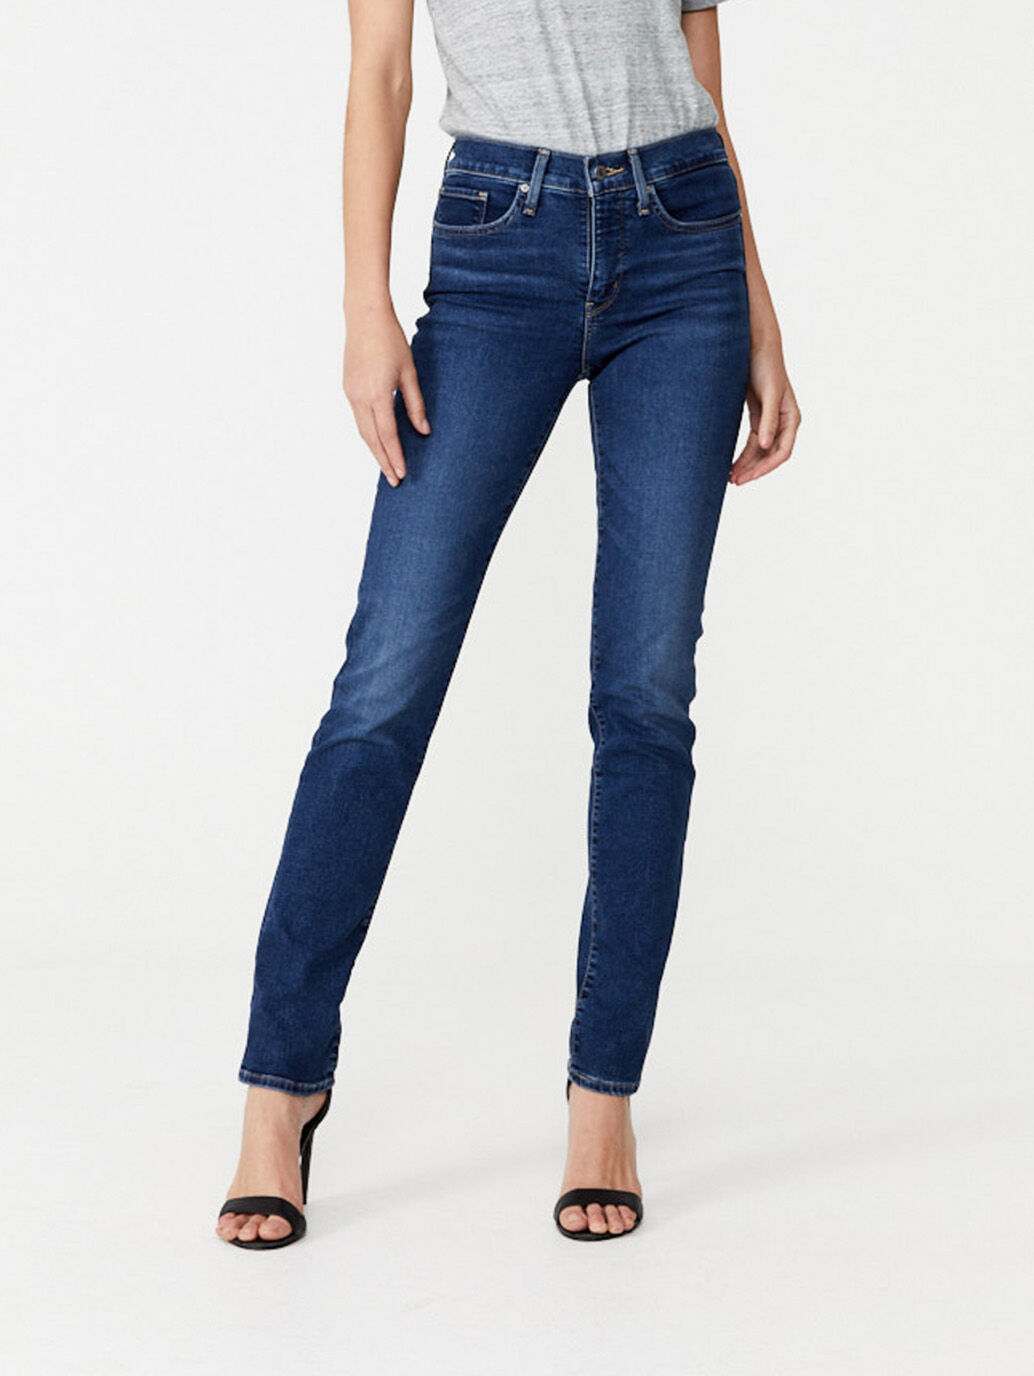 Women's Jeans - Your Perfect Fit At 